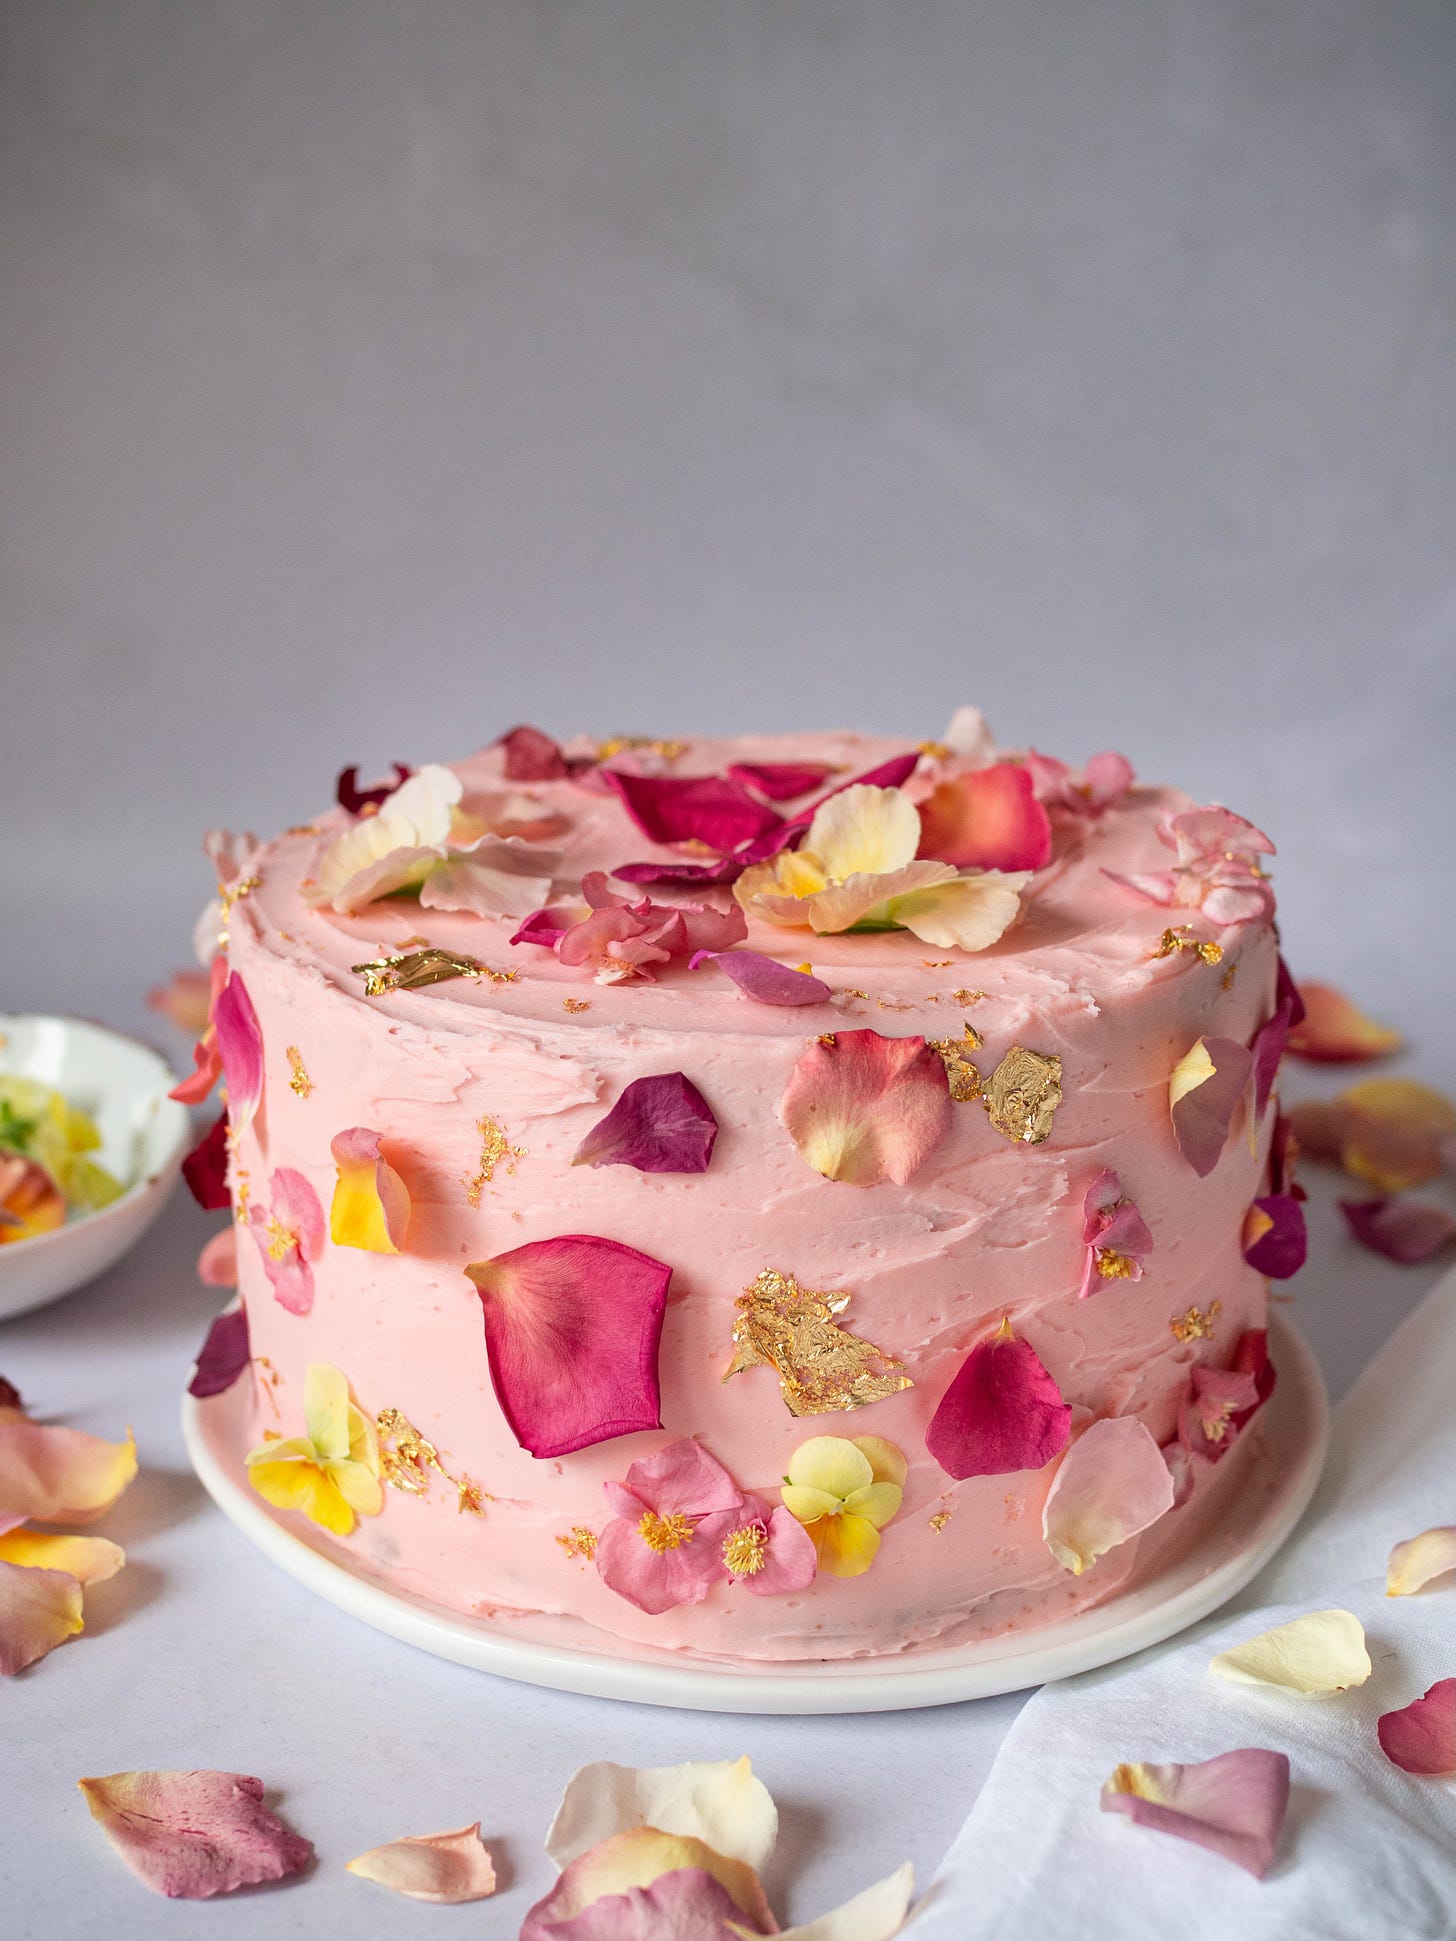 Vanilla and Passionfruit Curd Cake